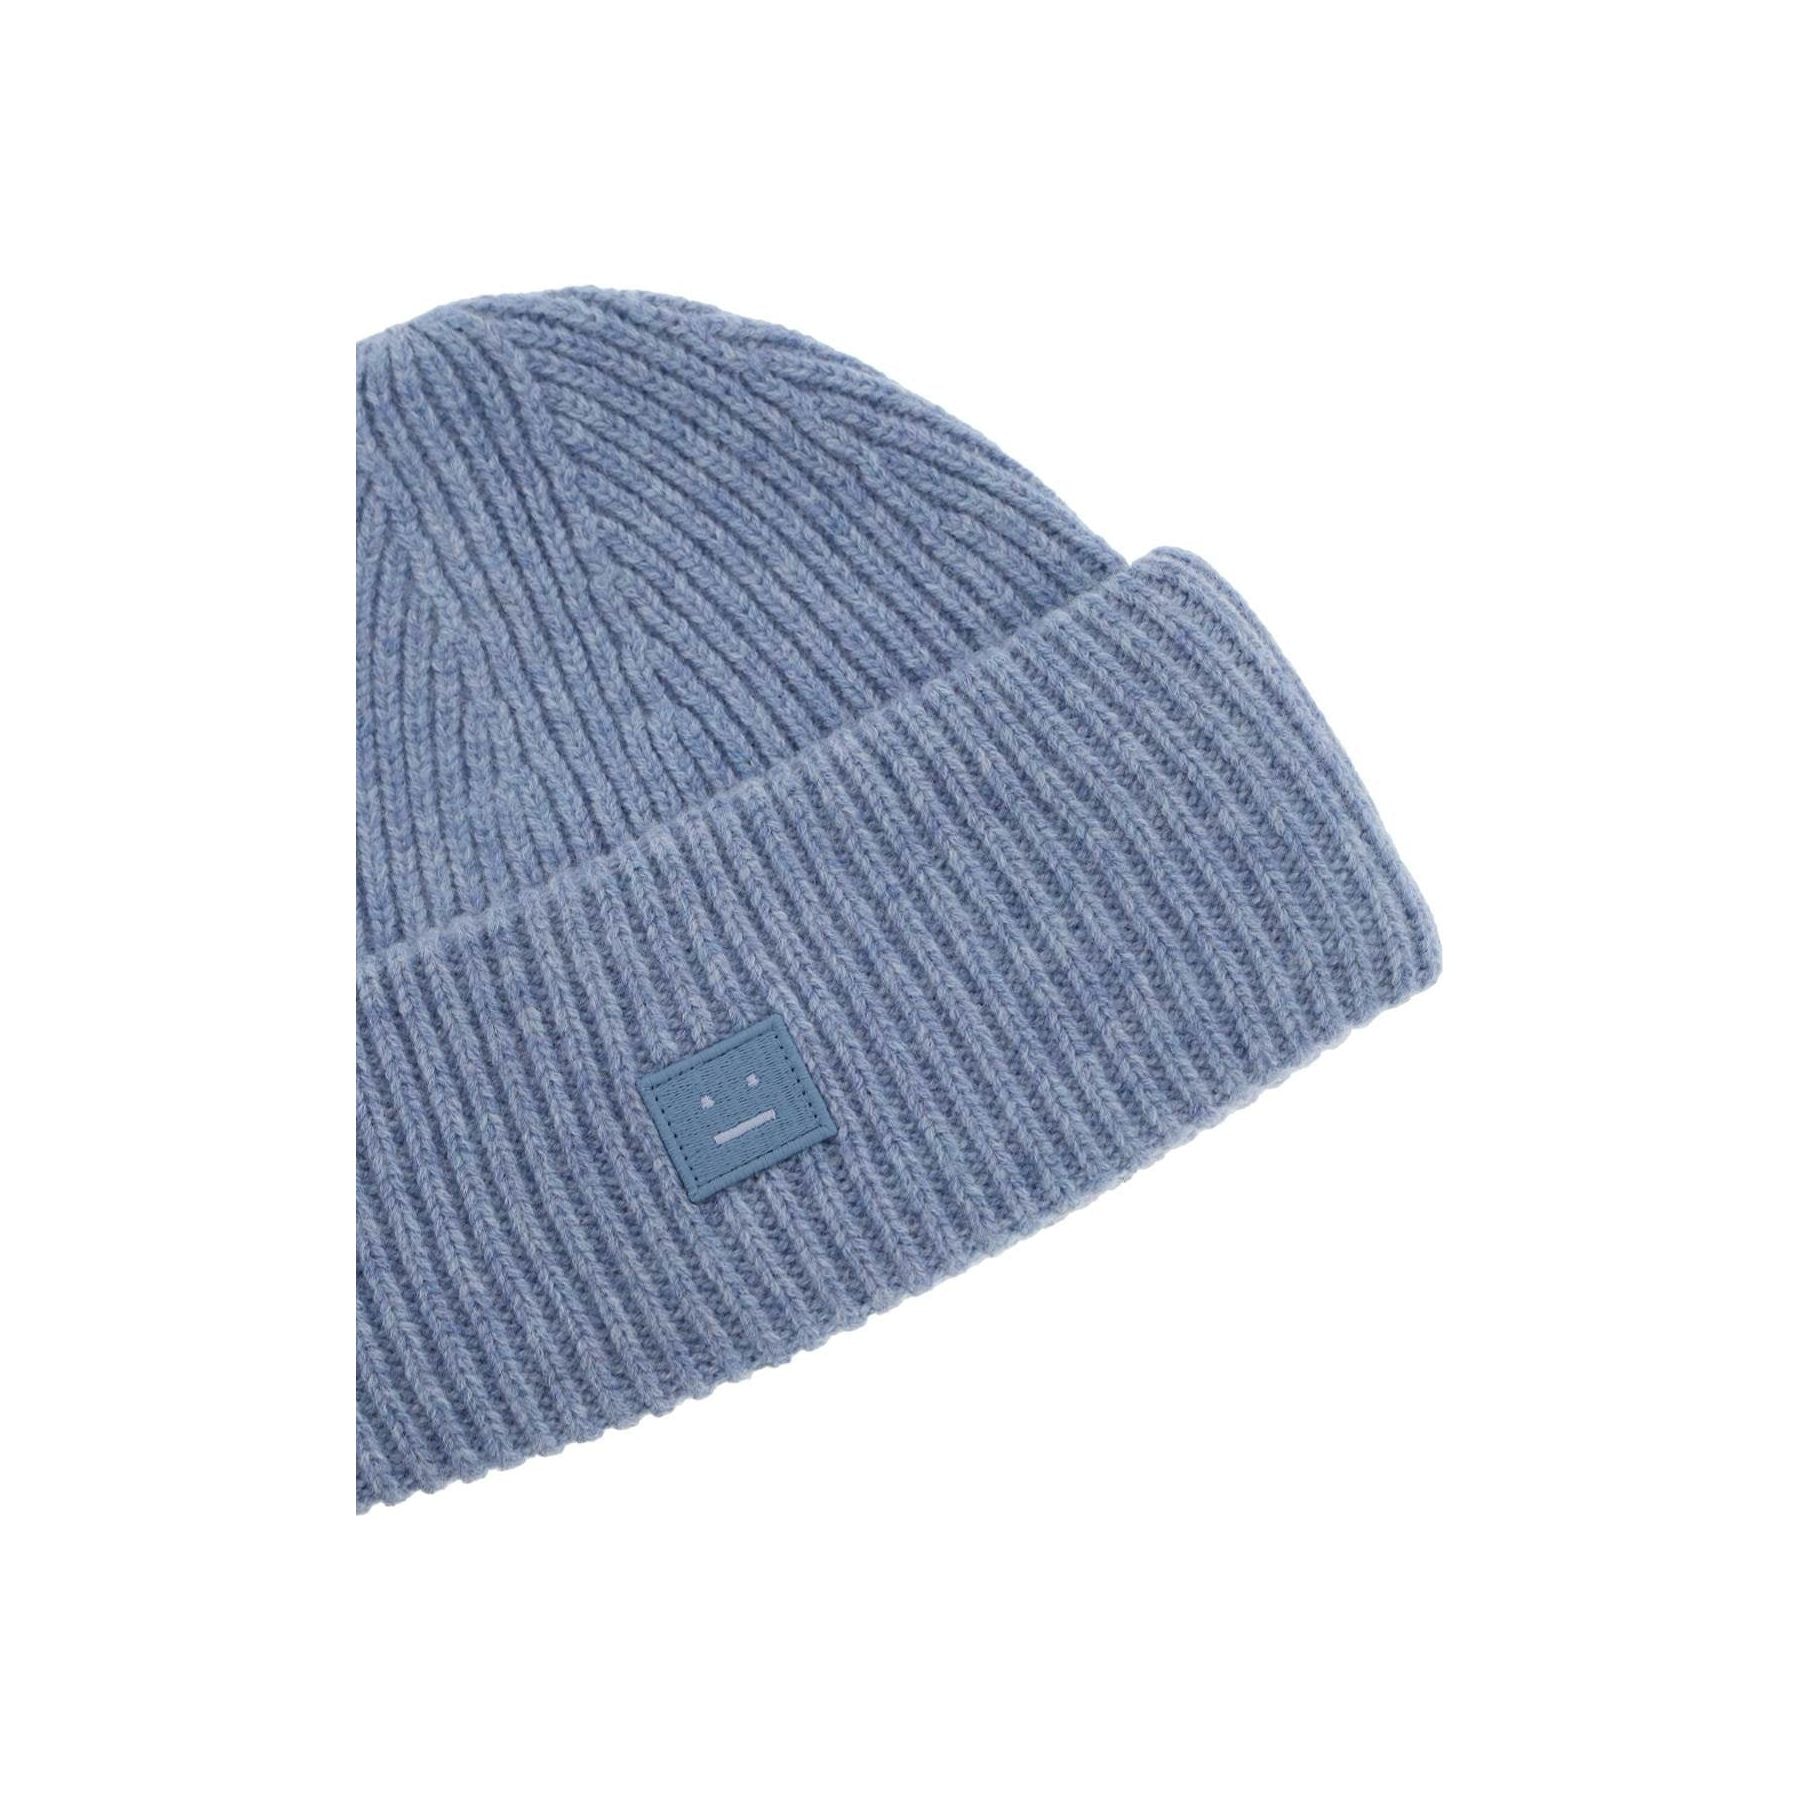 Small Face Patch Wool Knit Beanie Hat